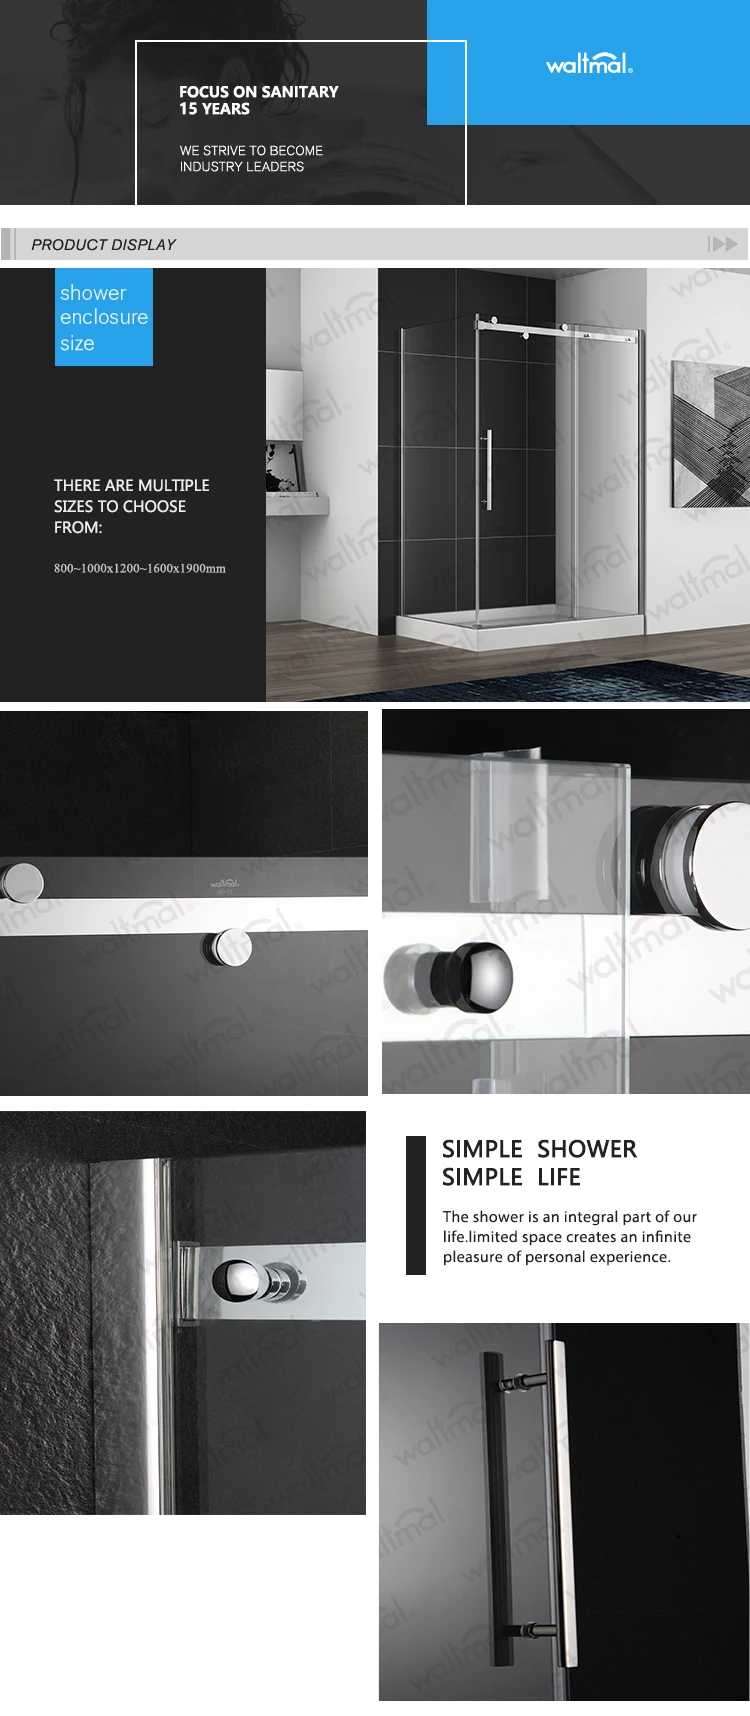 China Supplier Factory Direct Selling New Dubai Complete Simple Shower Room with SUS 304 handle